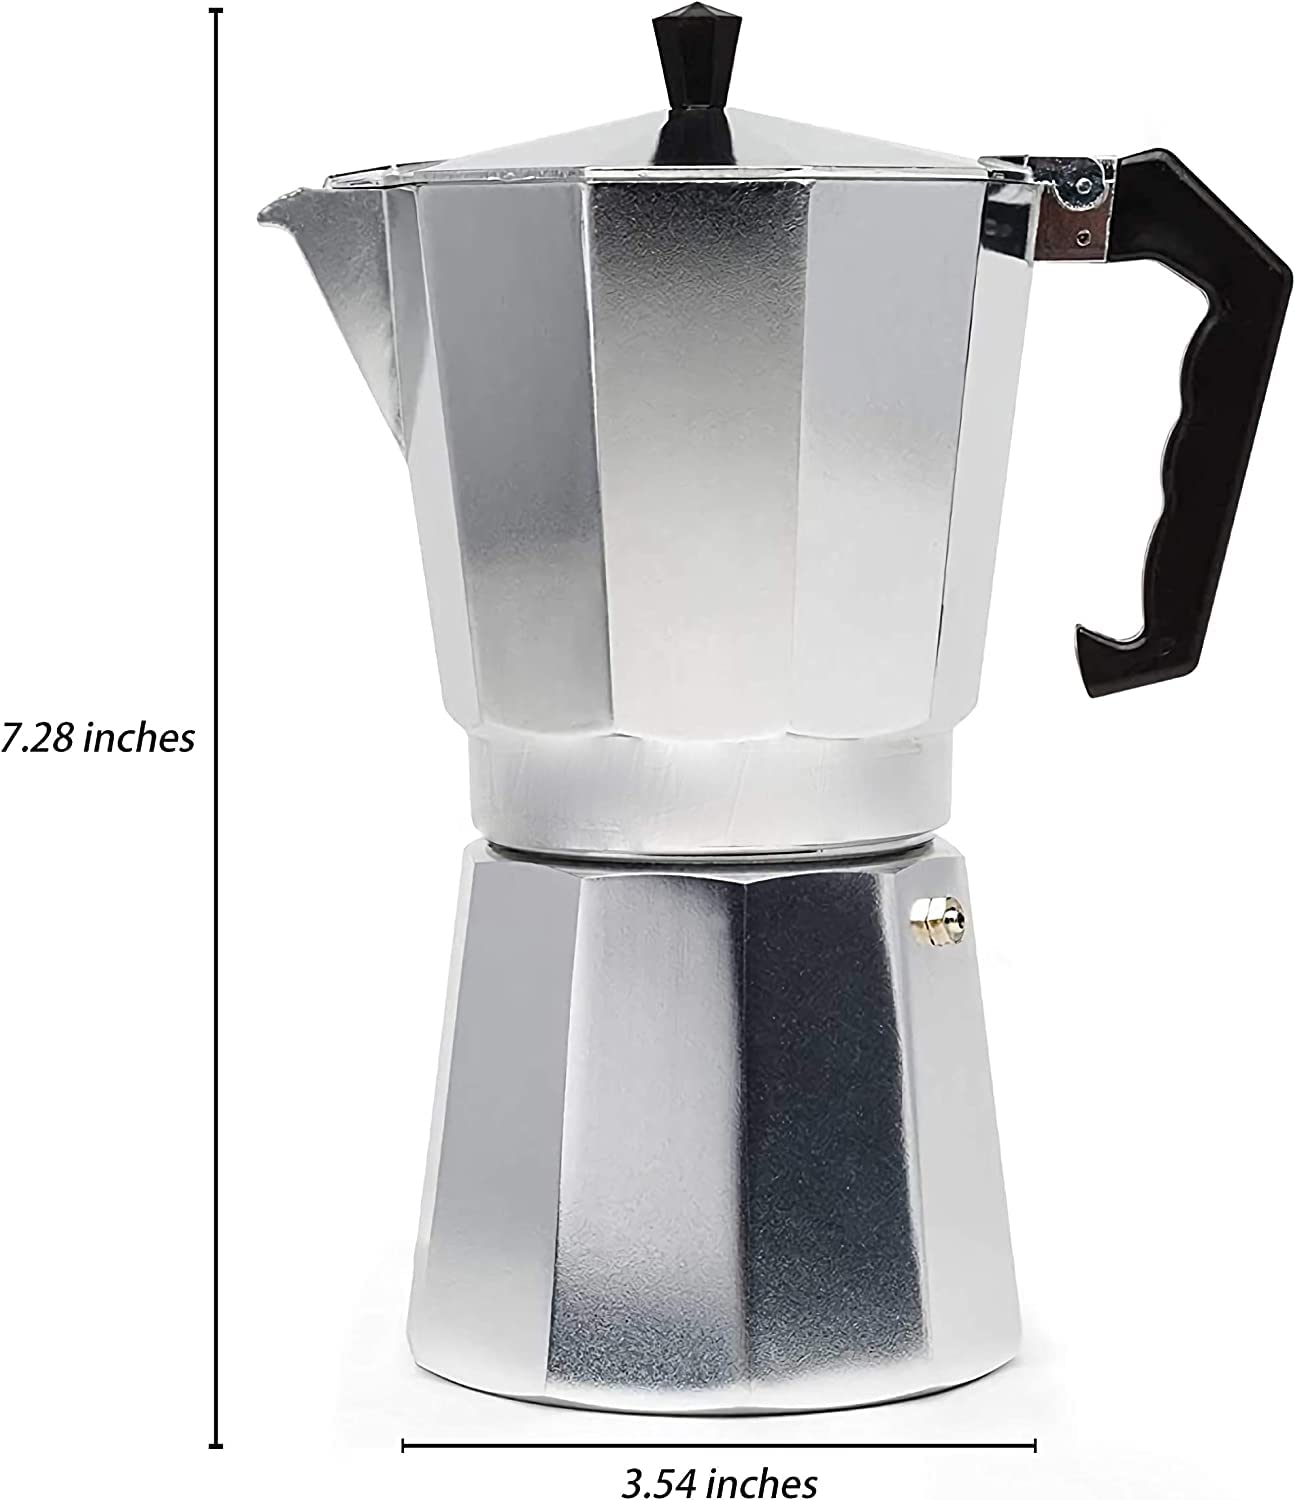 VIO Stovetop Espresso and Coffee Maker, Moka Pot for Classic Italian and Cuban Cafe Brewing, Cafetera (6 cup)